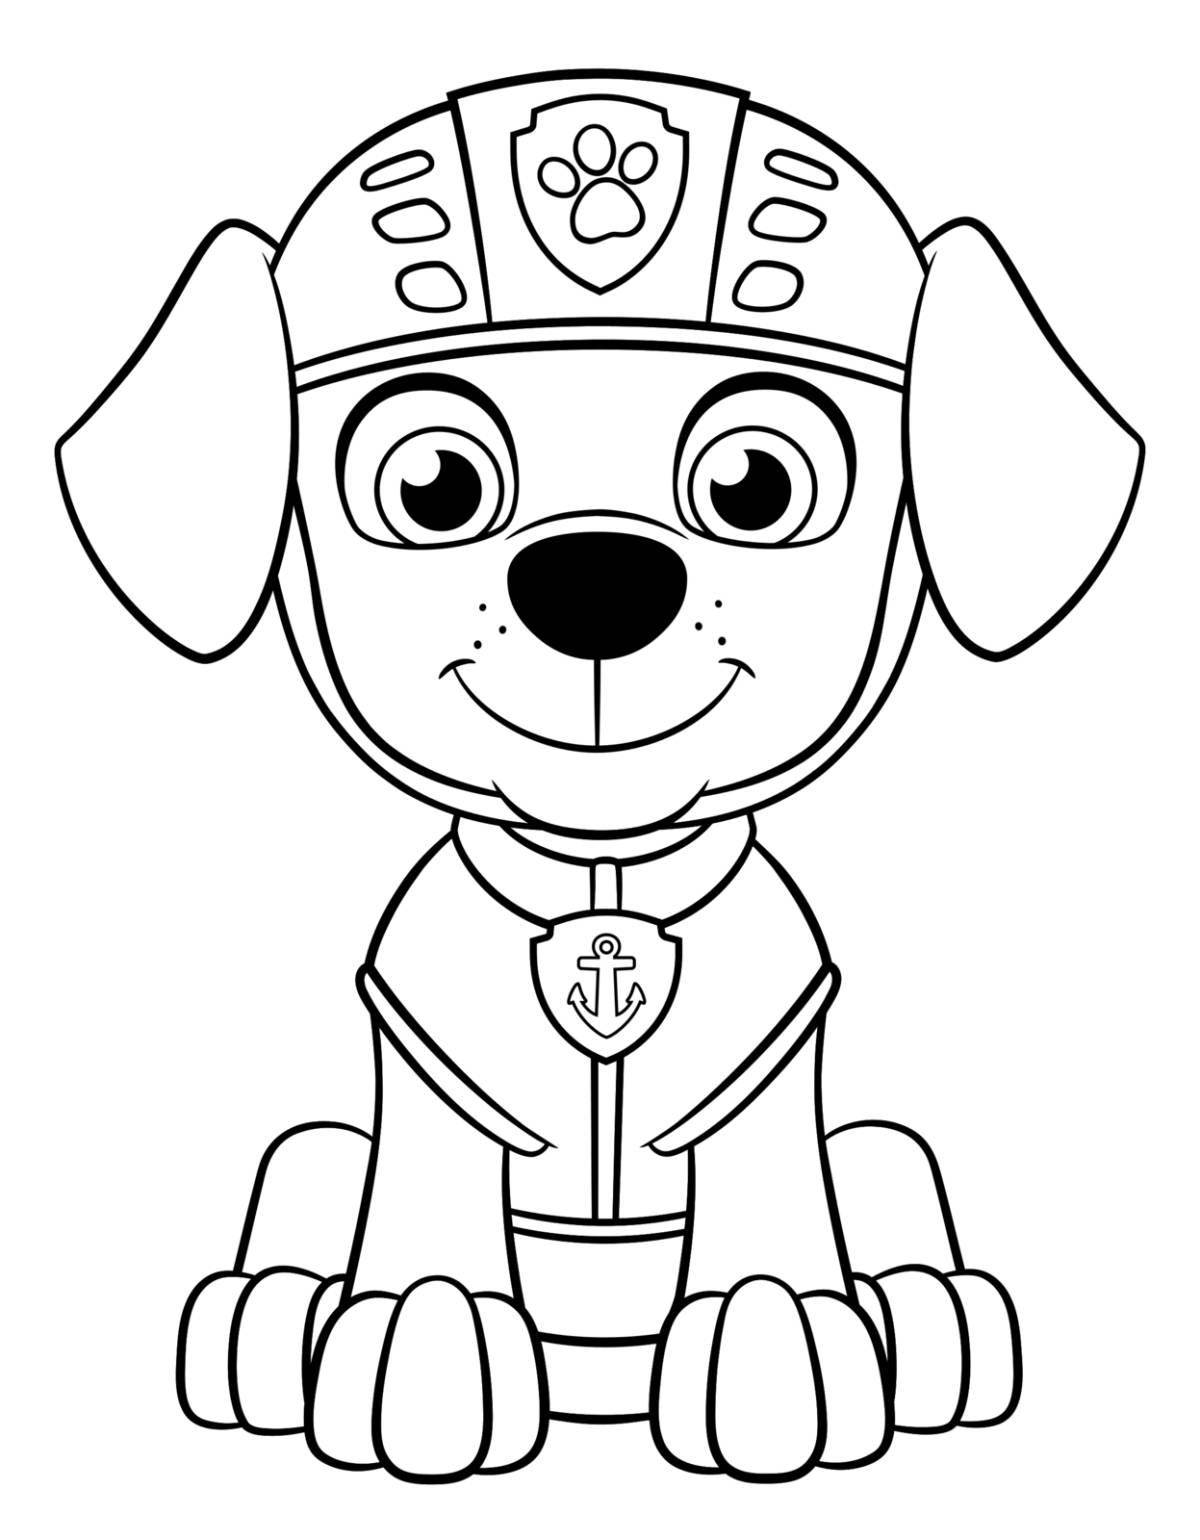 Paw patrol bright coloring with bright outline